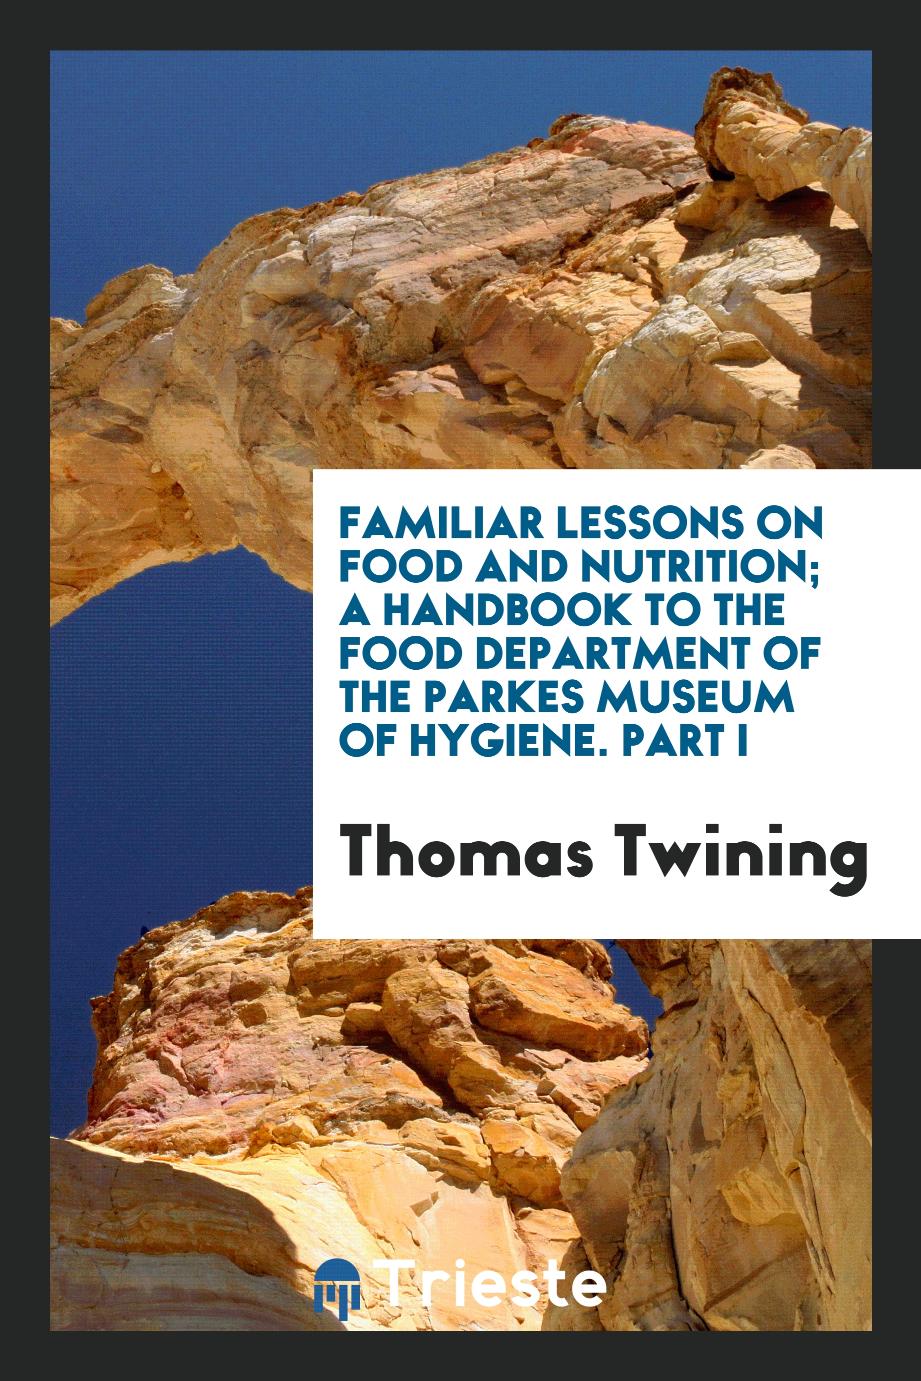 Thomas Twining - Familiar Lessons on Food and Nutrition; A Handbook to the Food Department of the Parkes Museum of Hygiene. Part I